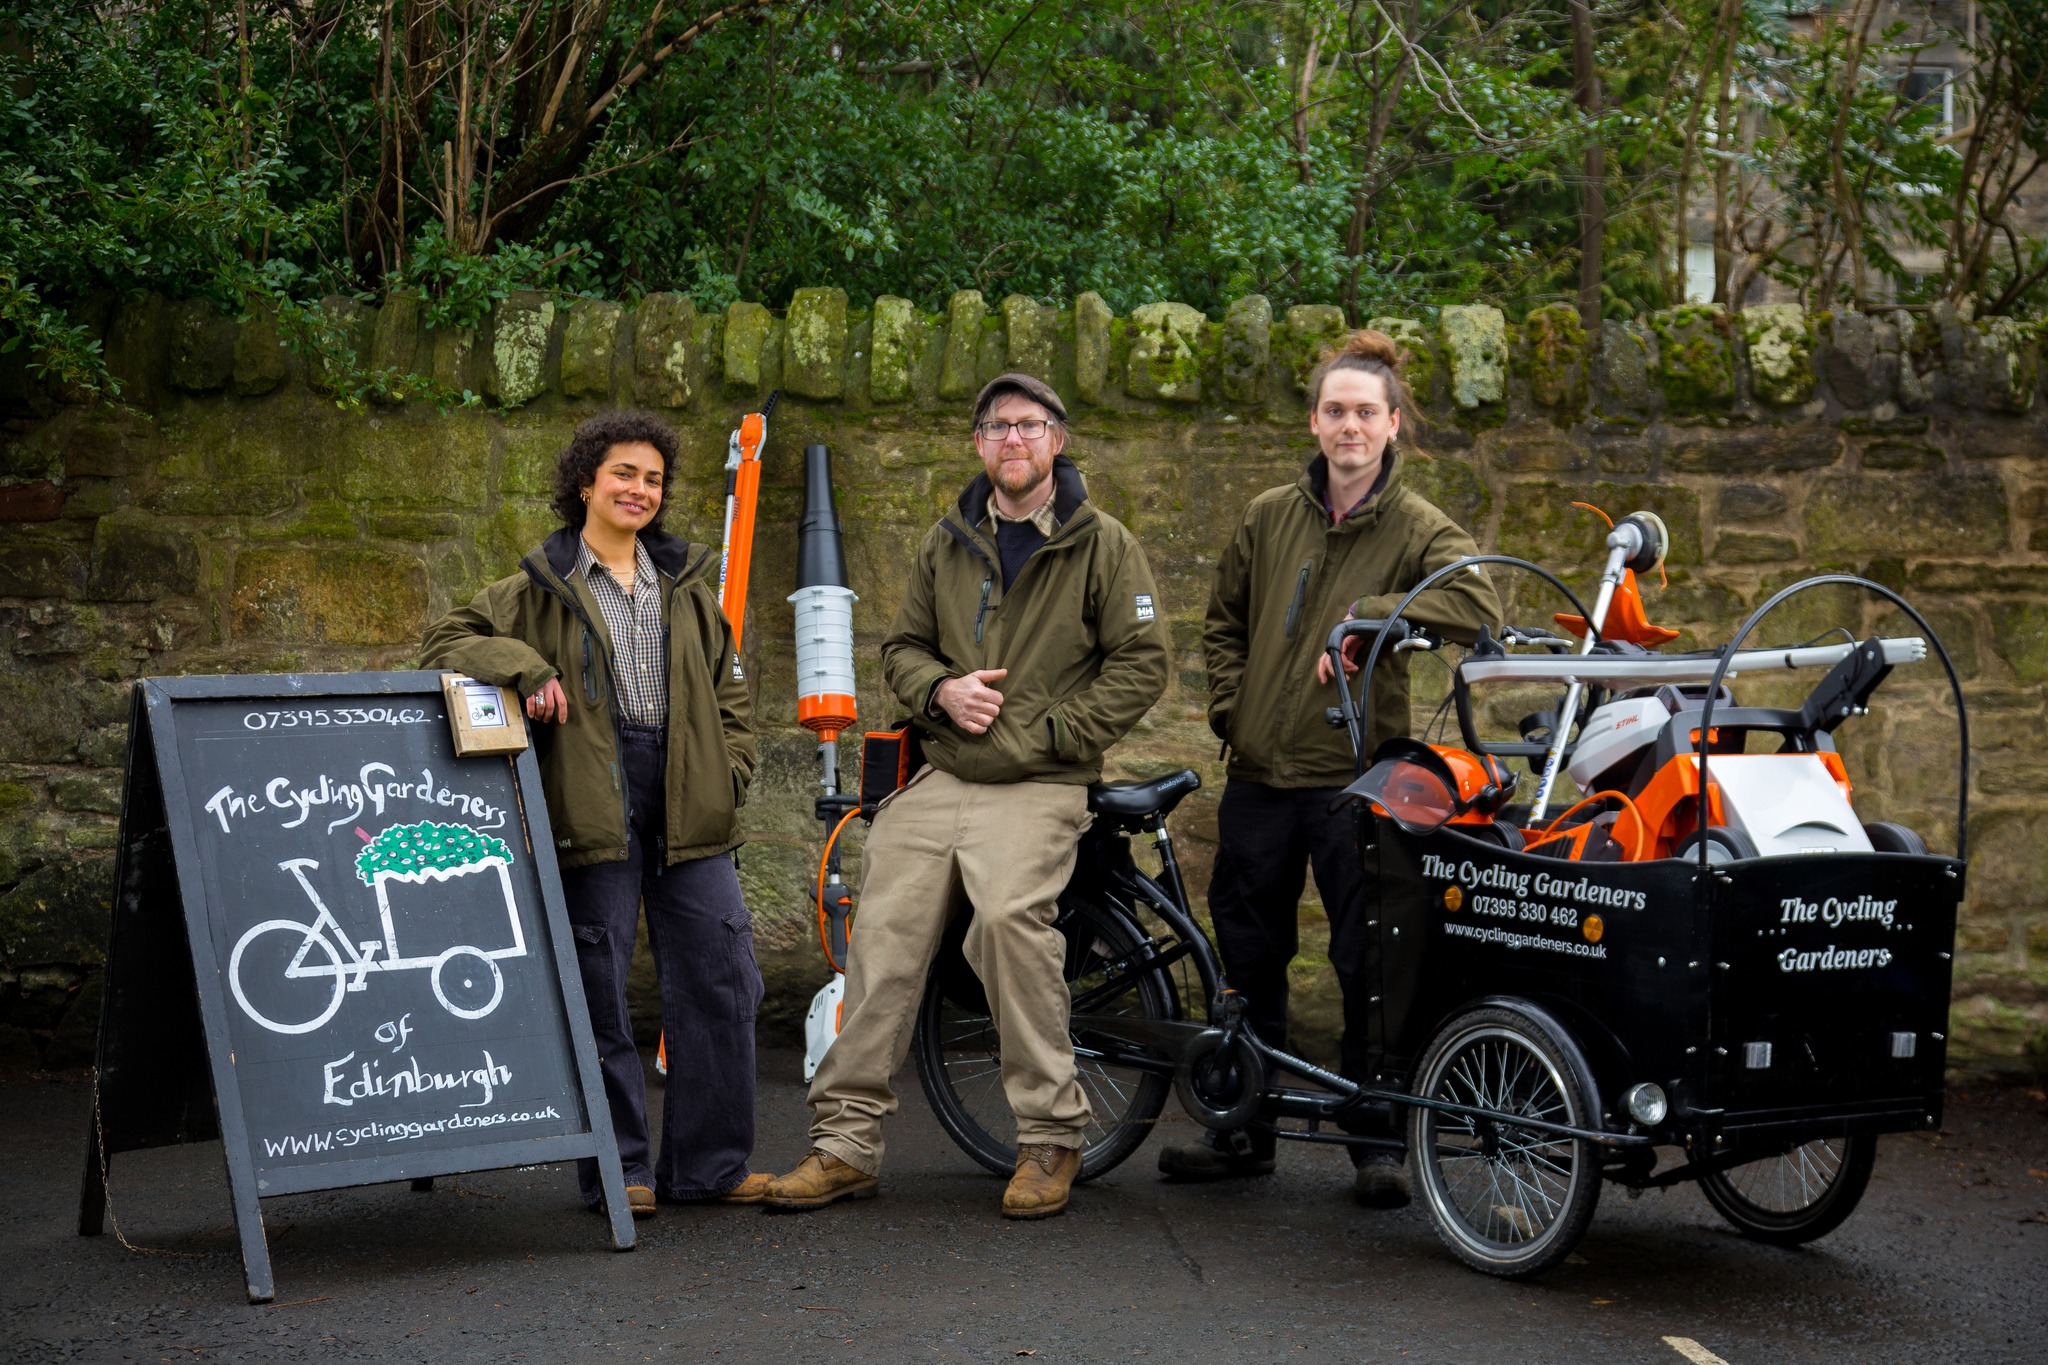 Business booming for The Cycling Gardeners of Edinburgh thanks to Business Gateway support